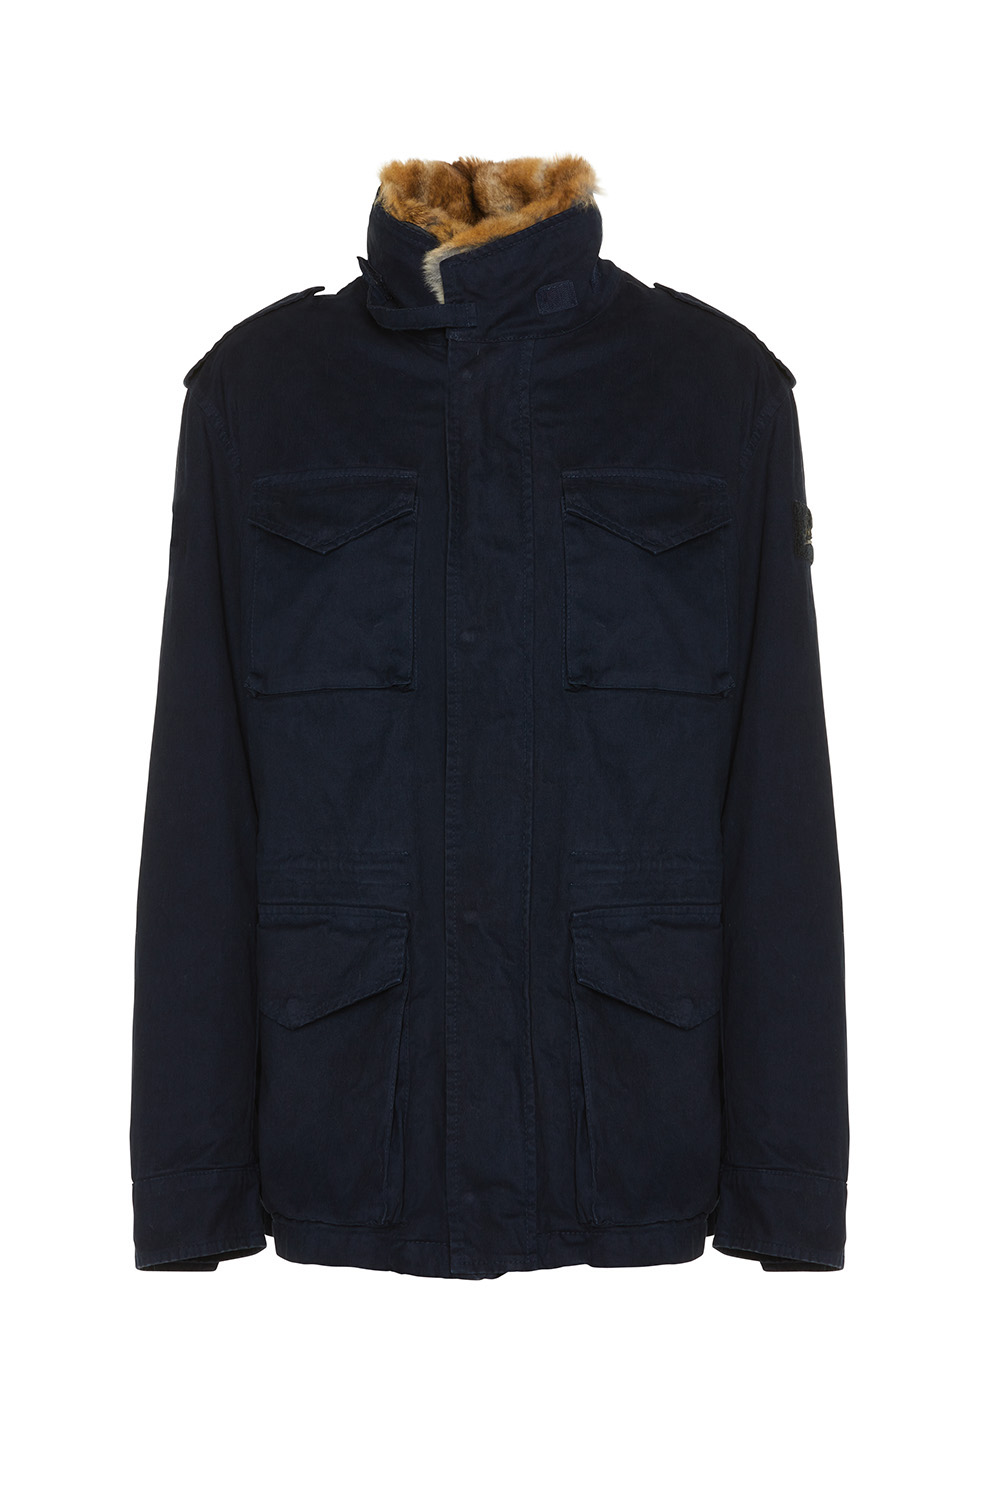 FIELD JACKET MAN - LAPIN SHAVED | Barbed Store